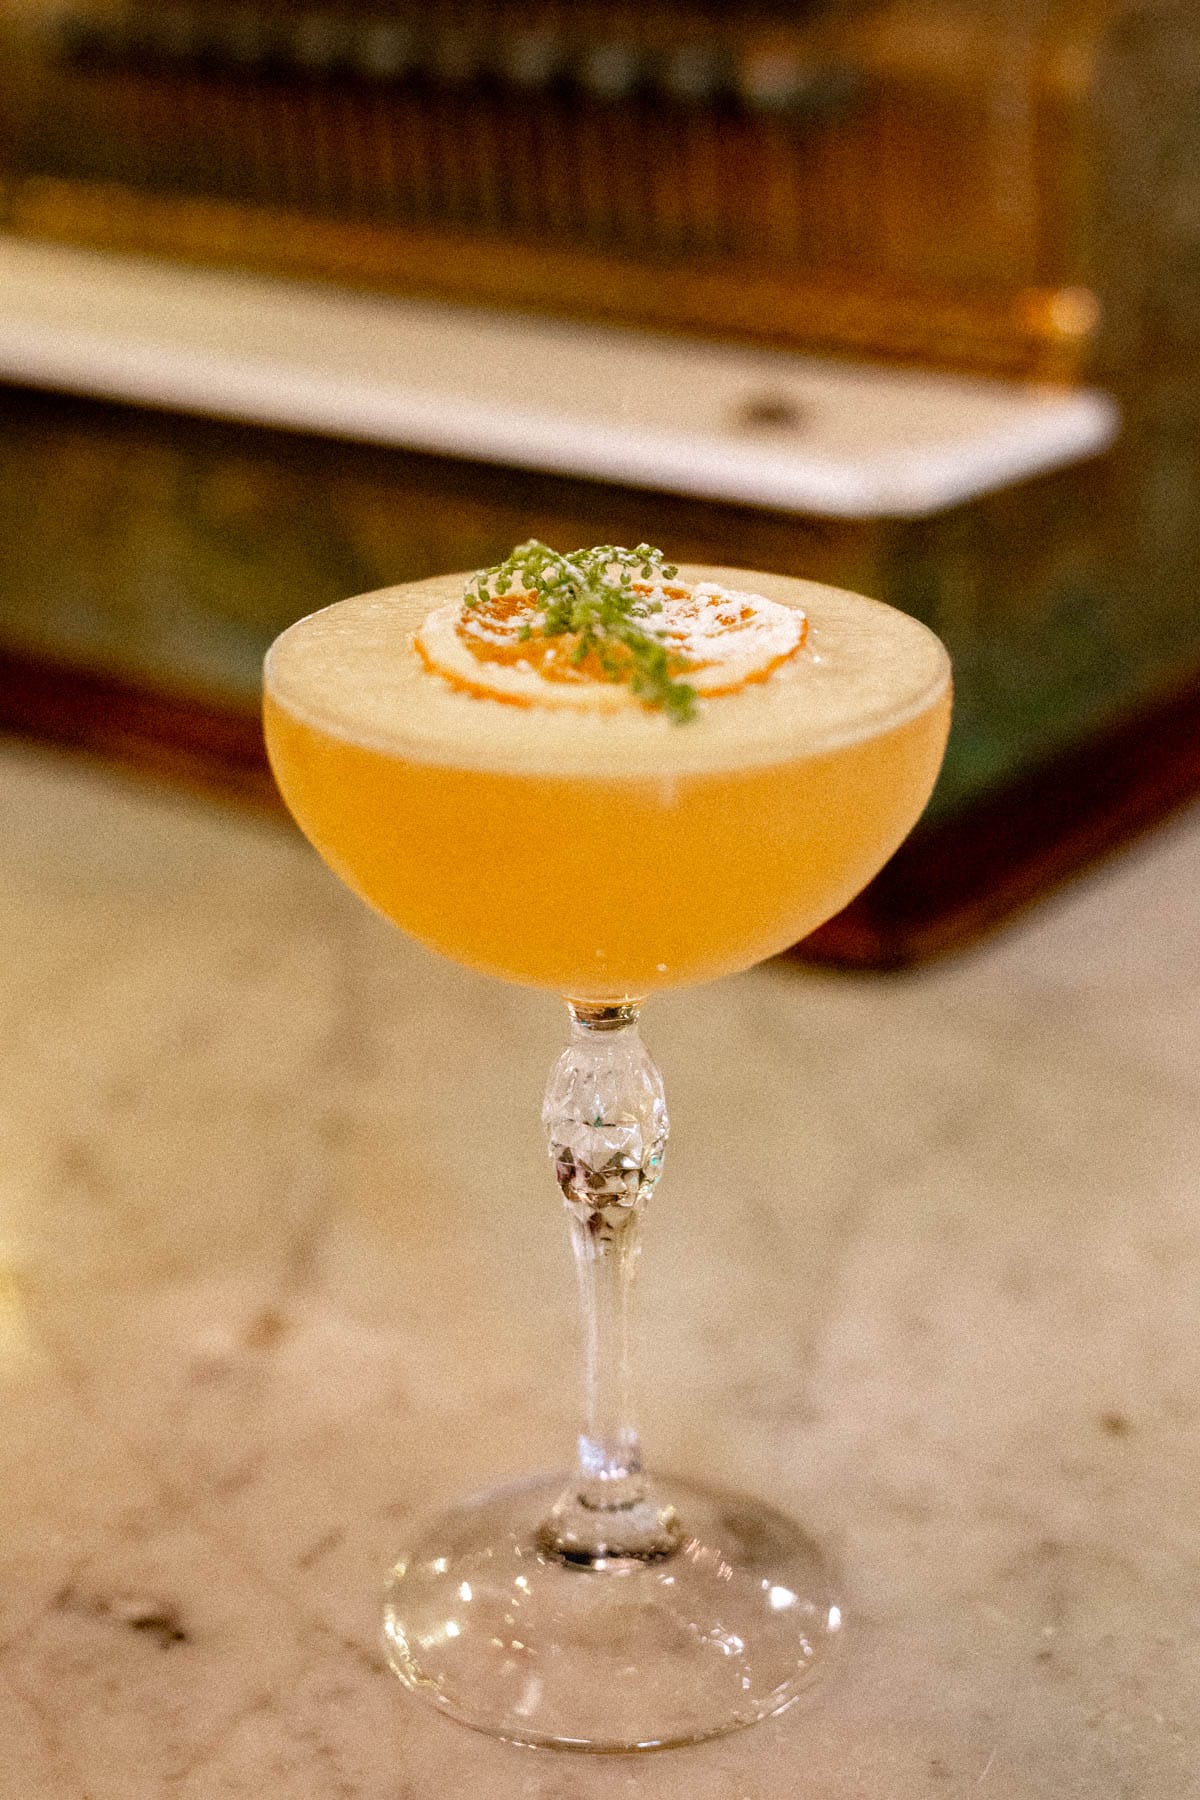 Mocktail from Oscar Wilde
Best things to do in New York City in the Fall